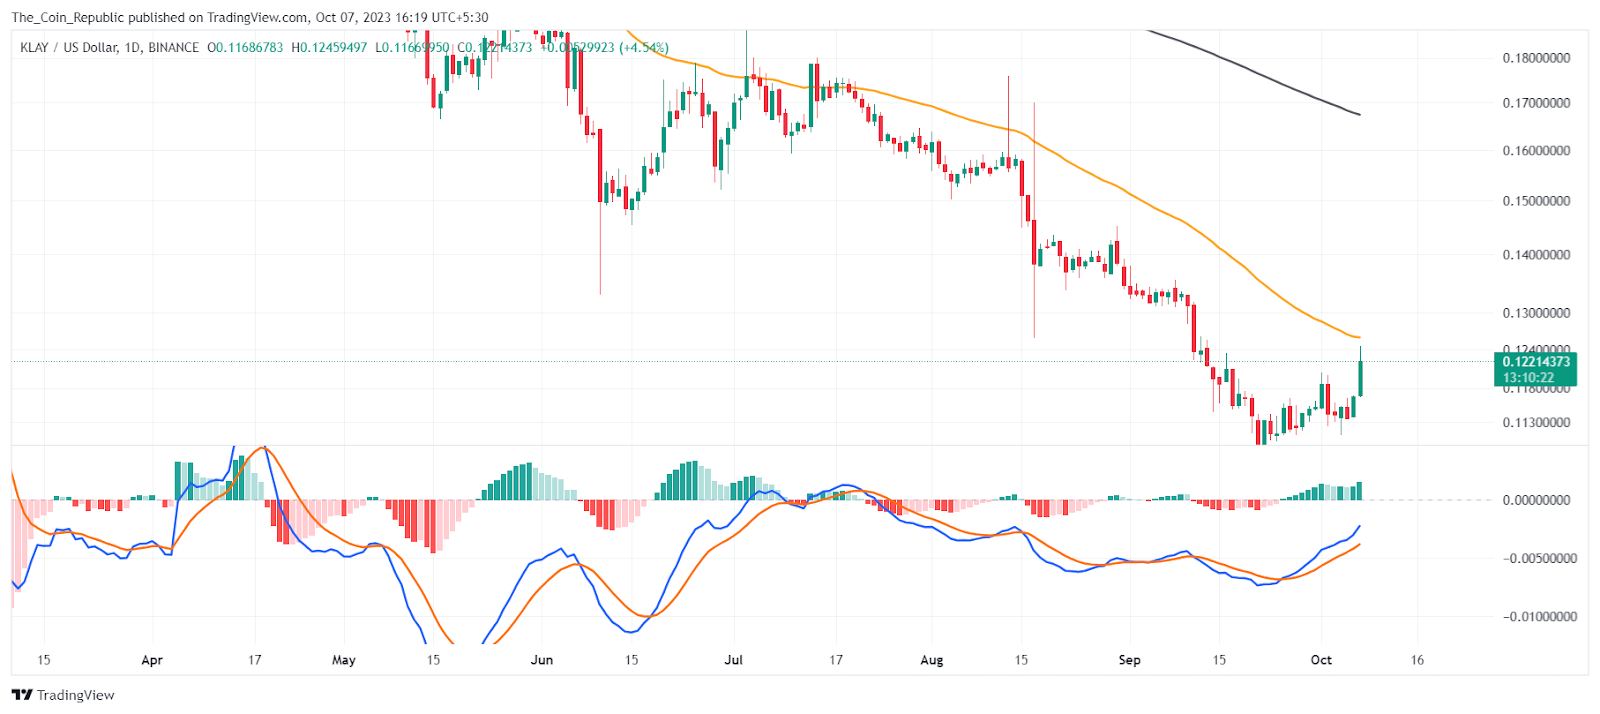 Klaytn Price (KLAY) Crypto Gains 7%: Outlook For the Next Week?